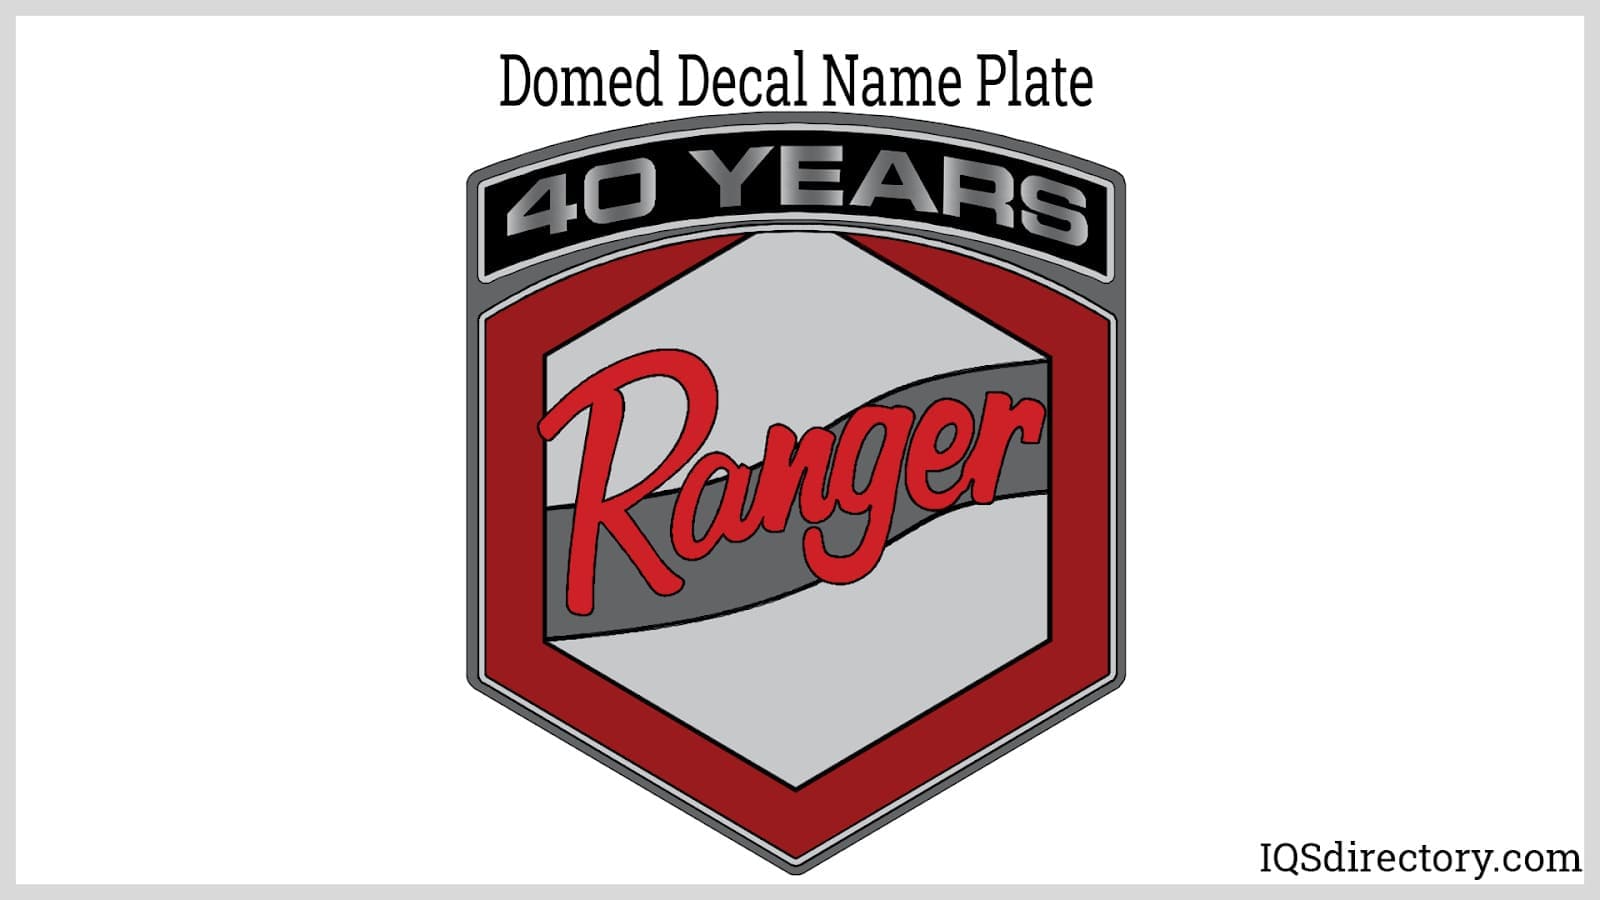 Domed Decal Name Plate